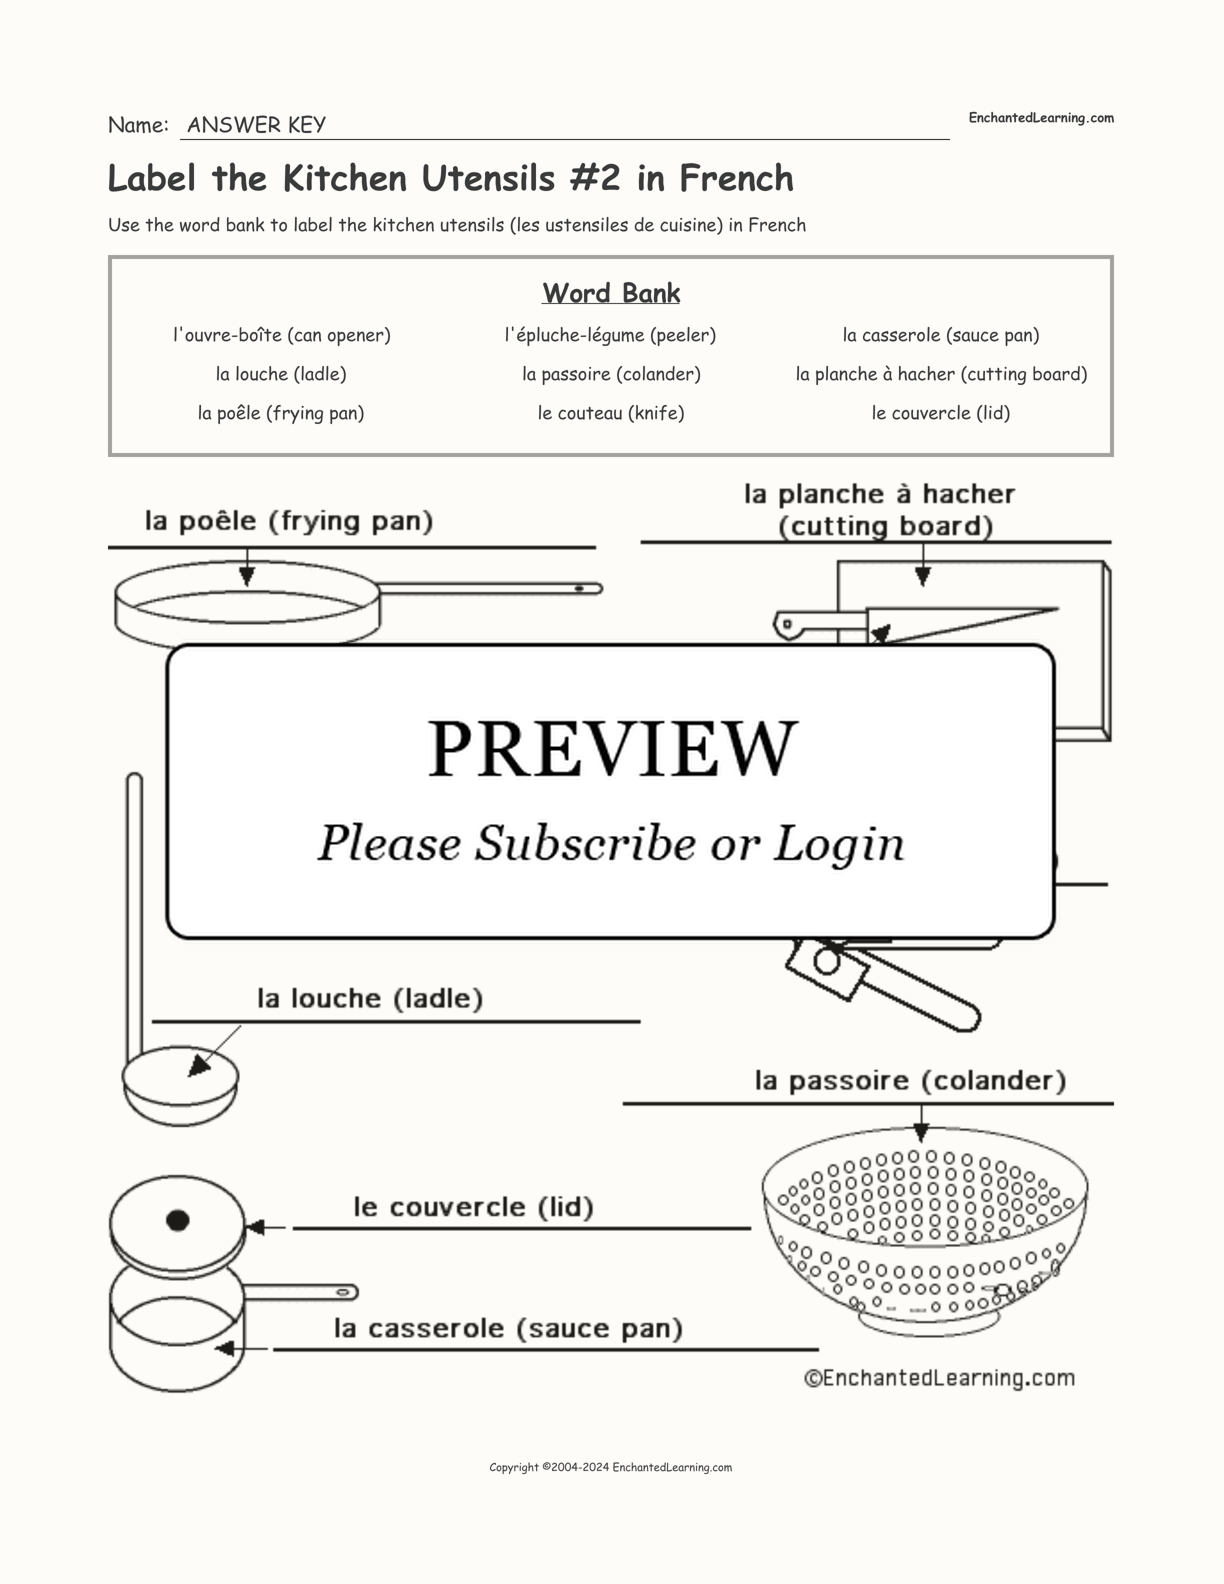 Label the Kitchen Utensils #2 in French interactive worksheet page 2